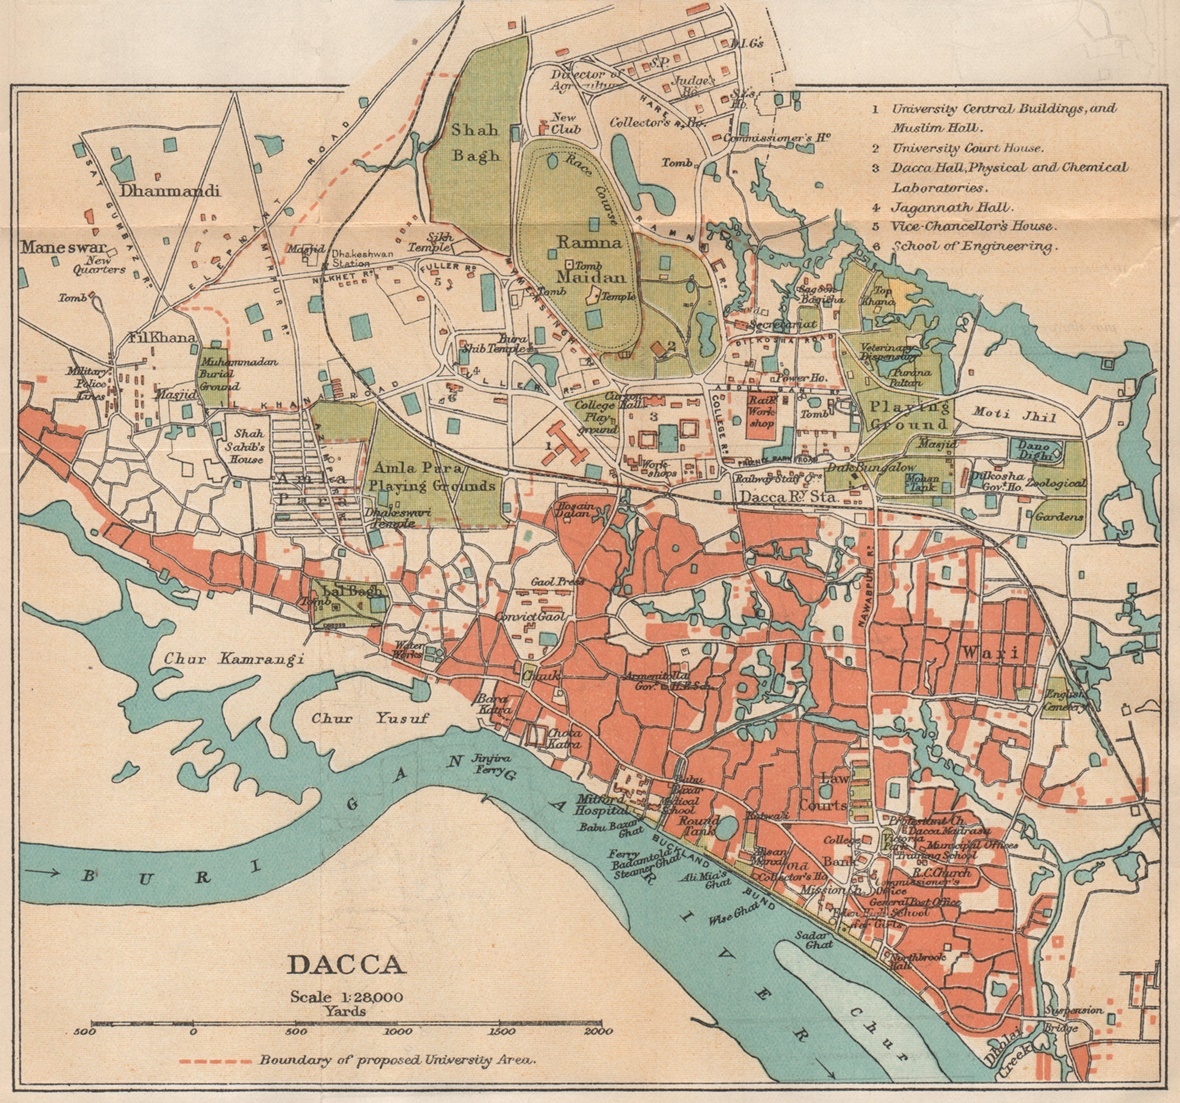 Dhaka in 1924 as a perpetually porous city, permeated and defined by water.  Image courtesy of Antiqua Print Gallery/Alamy